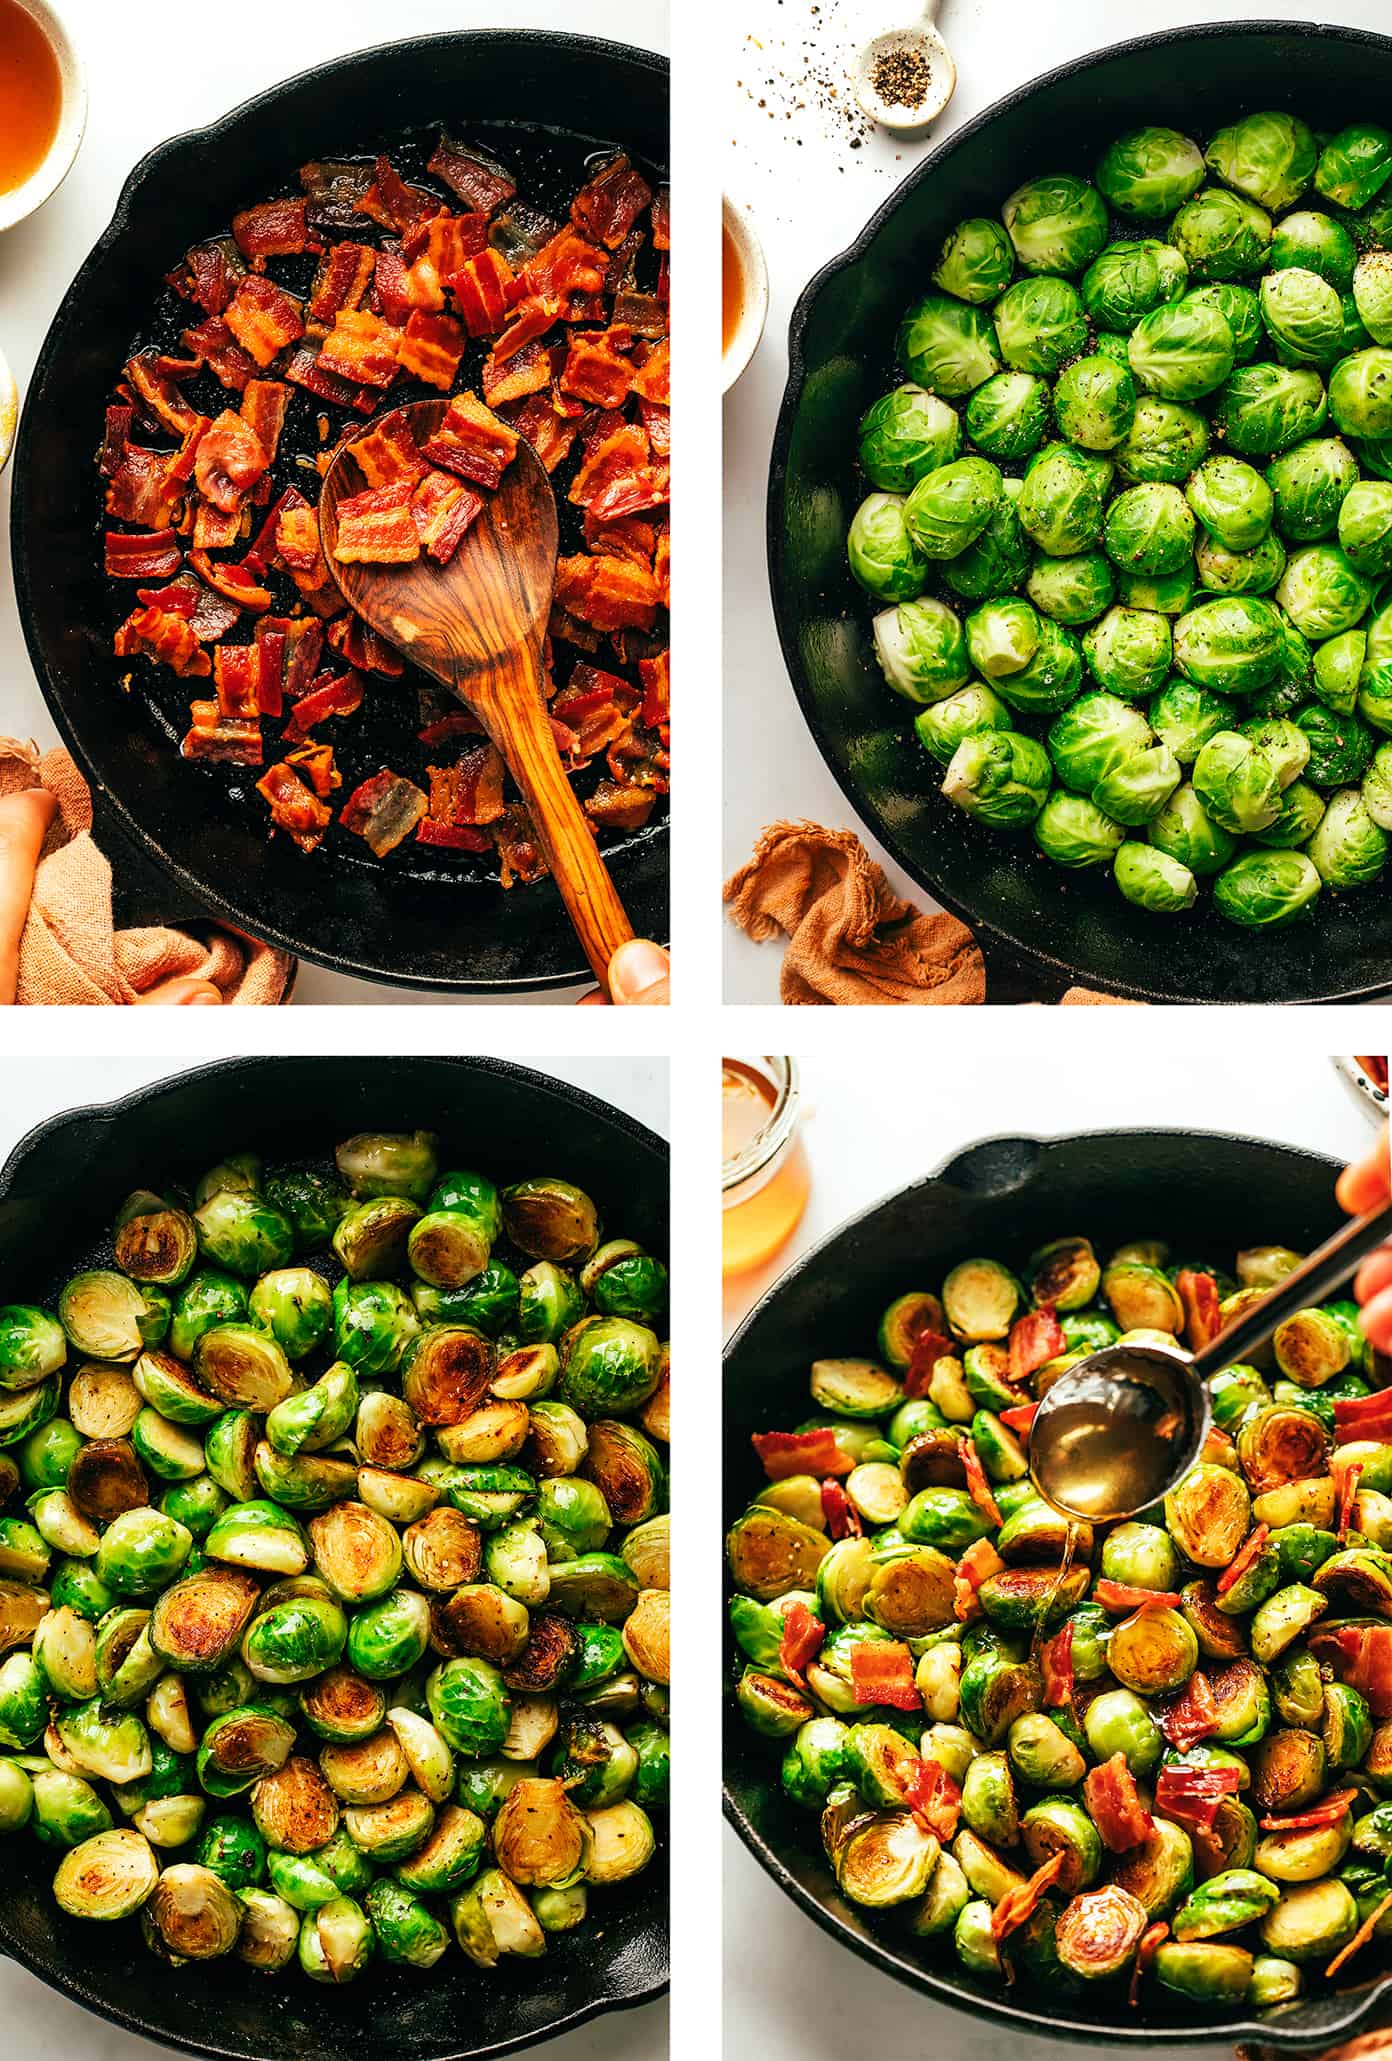 Step by step photos showing how to make bacon Brussels sprouts